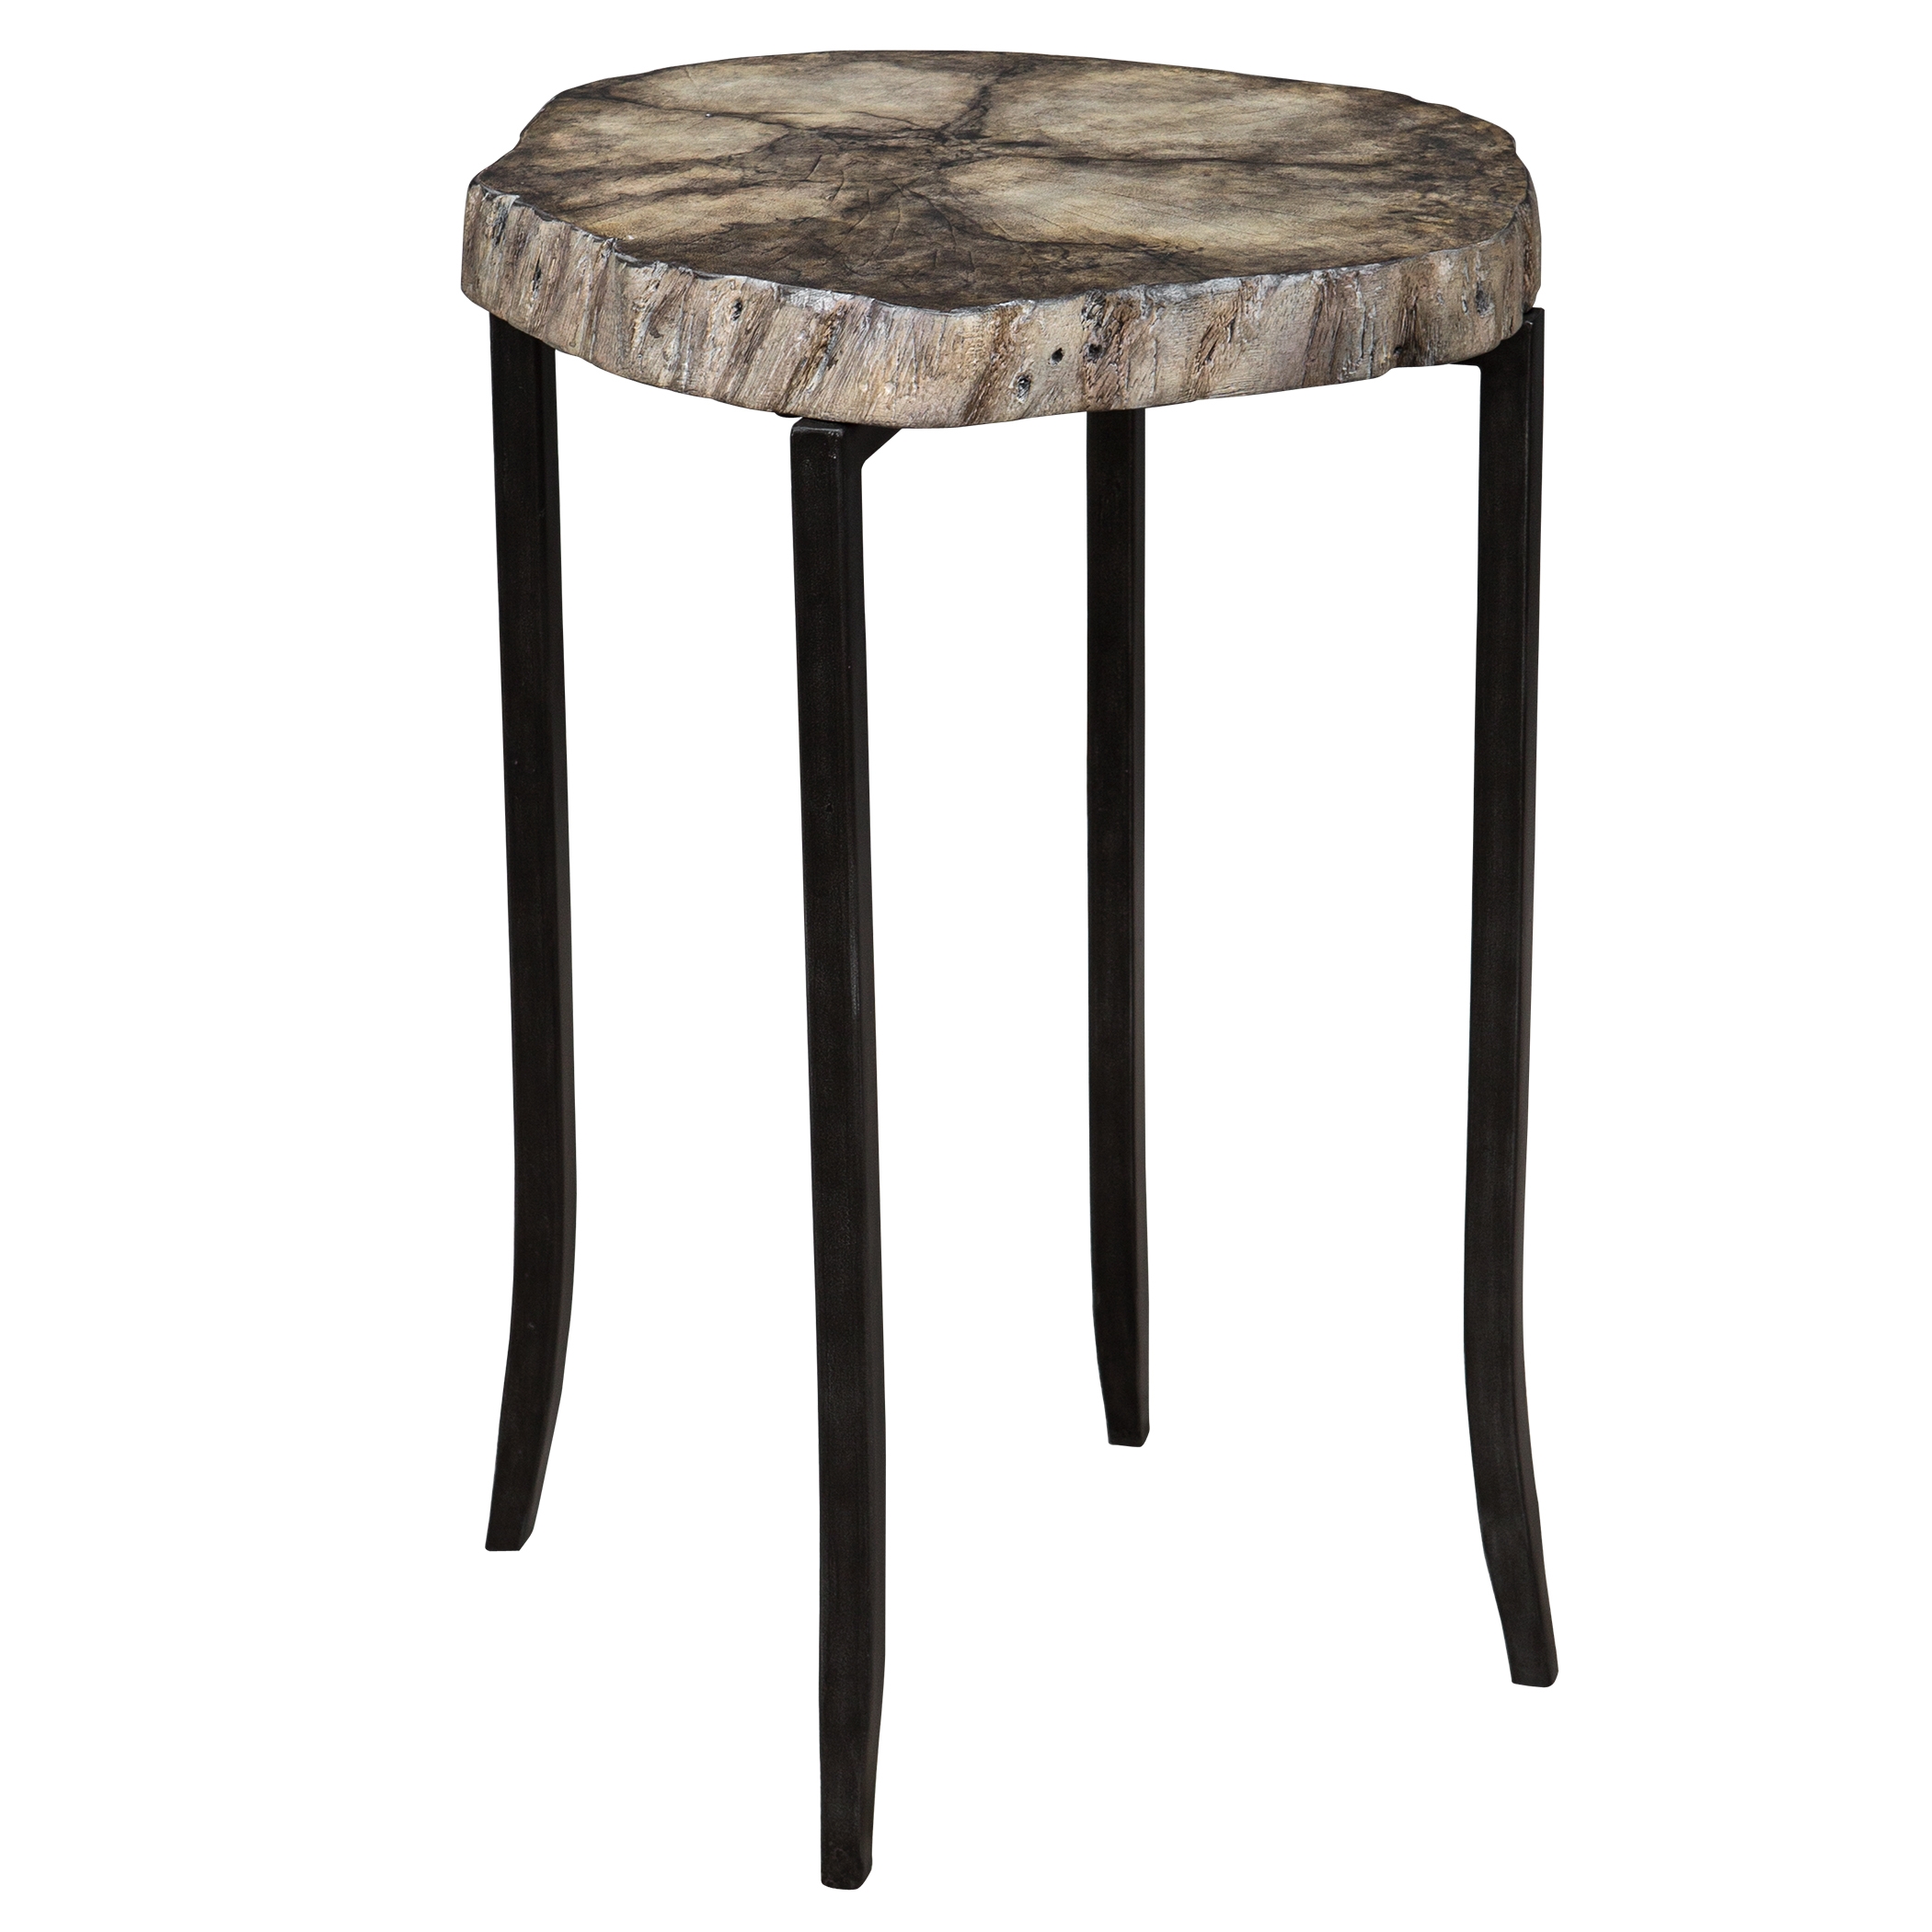 Stiles Rustic Accent Table - Image 2